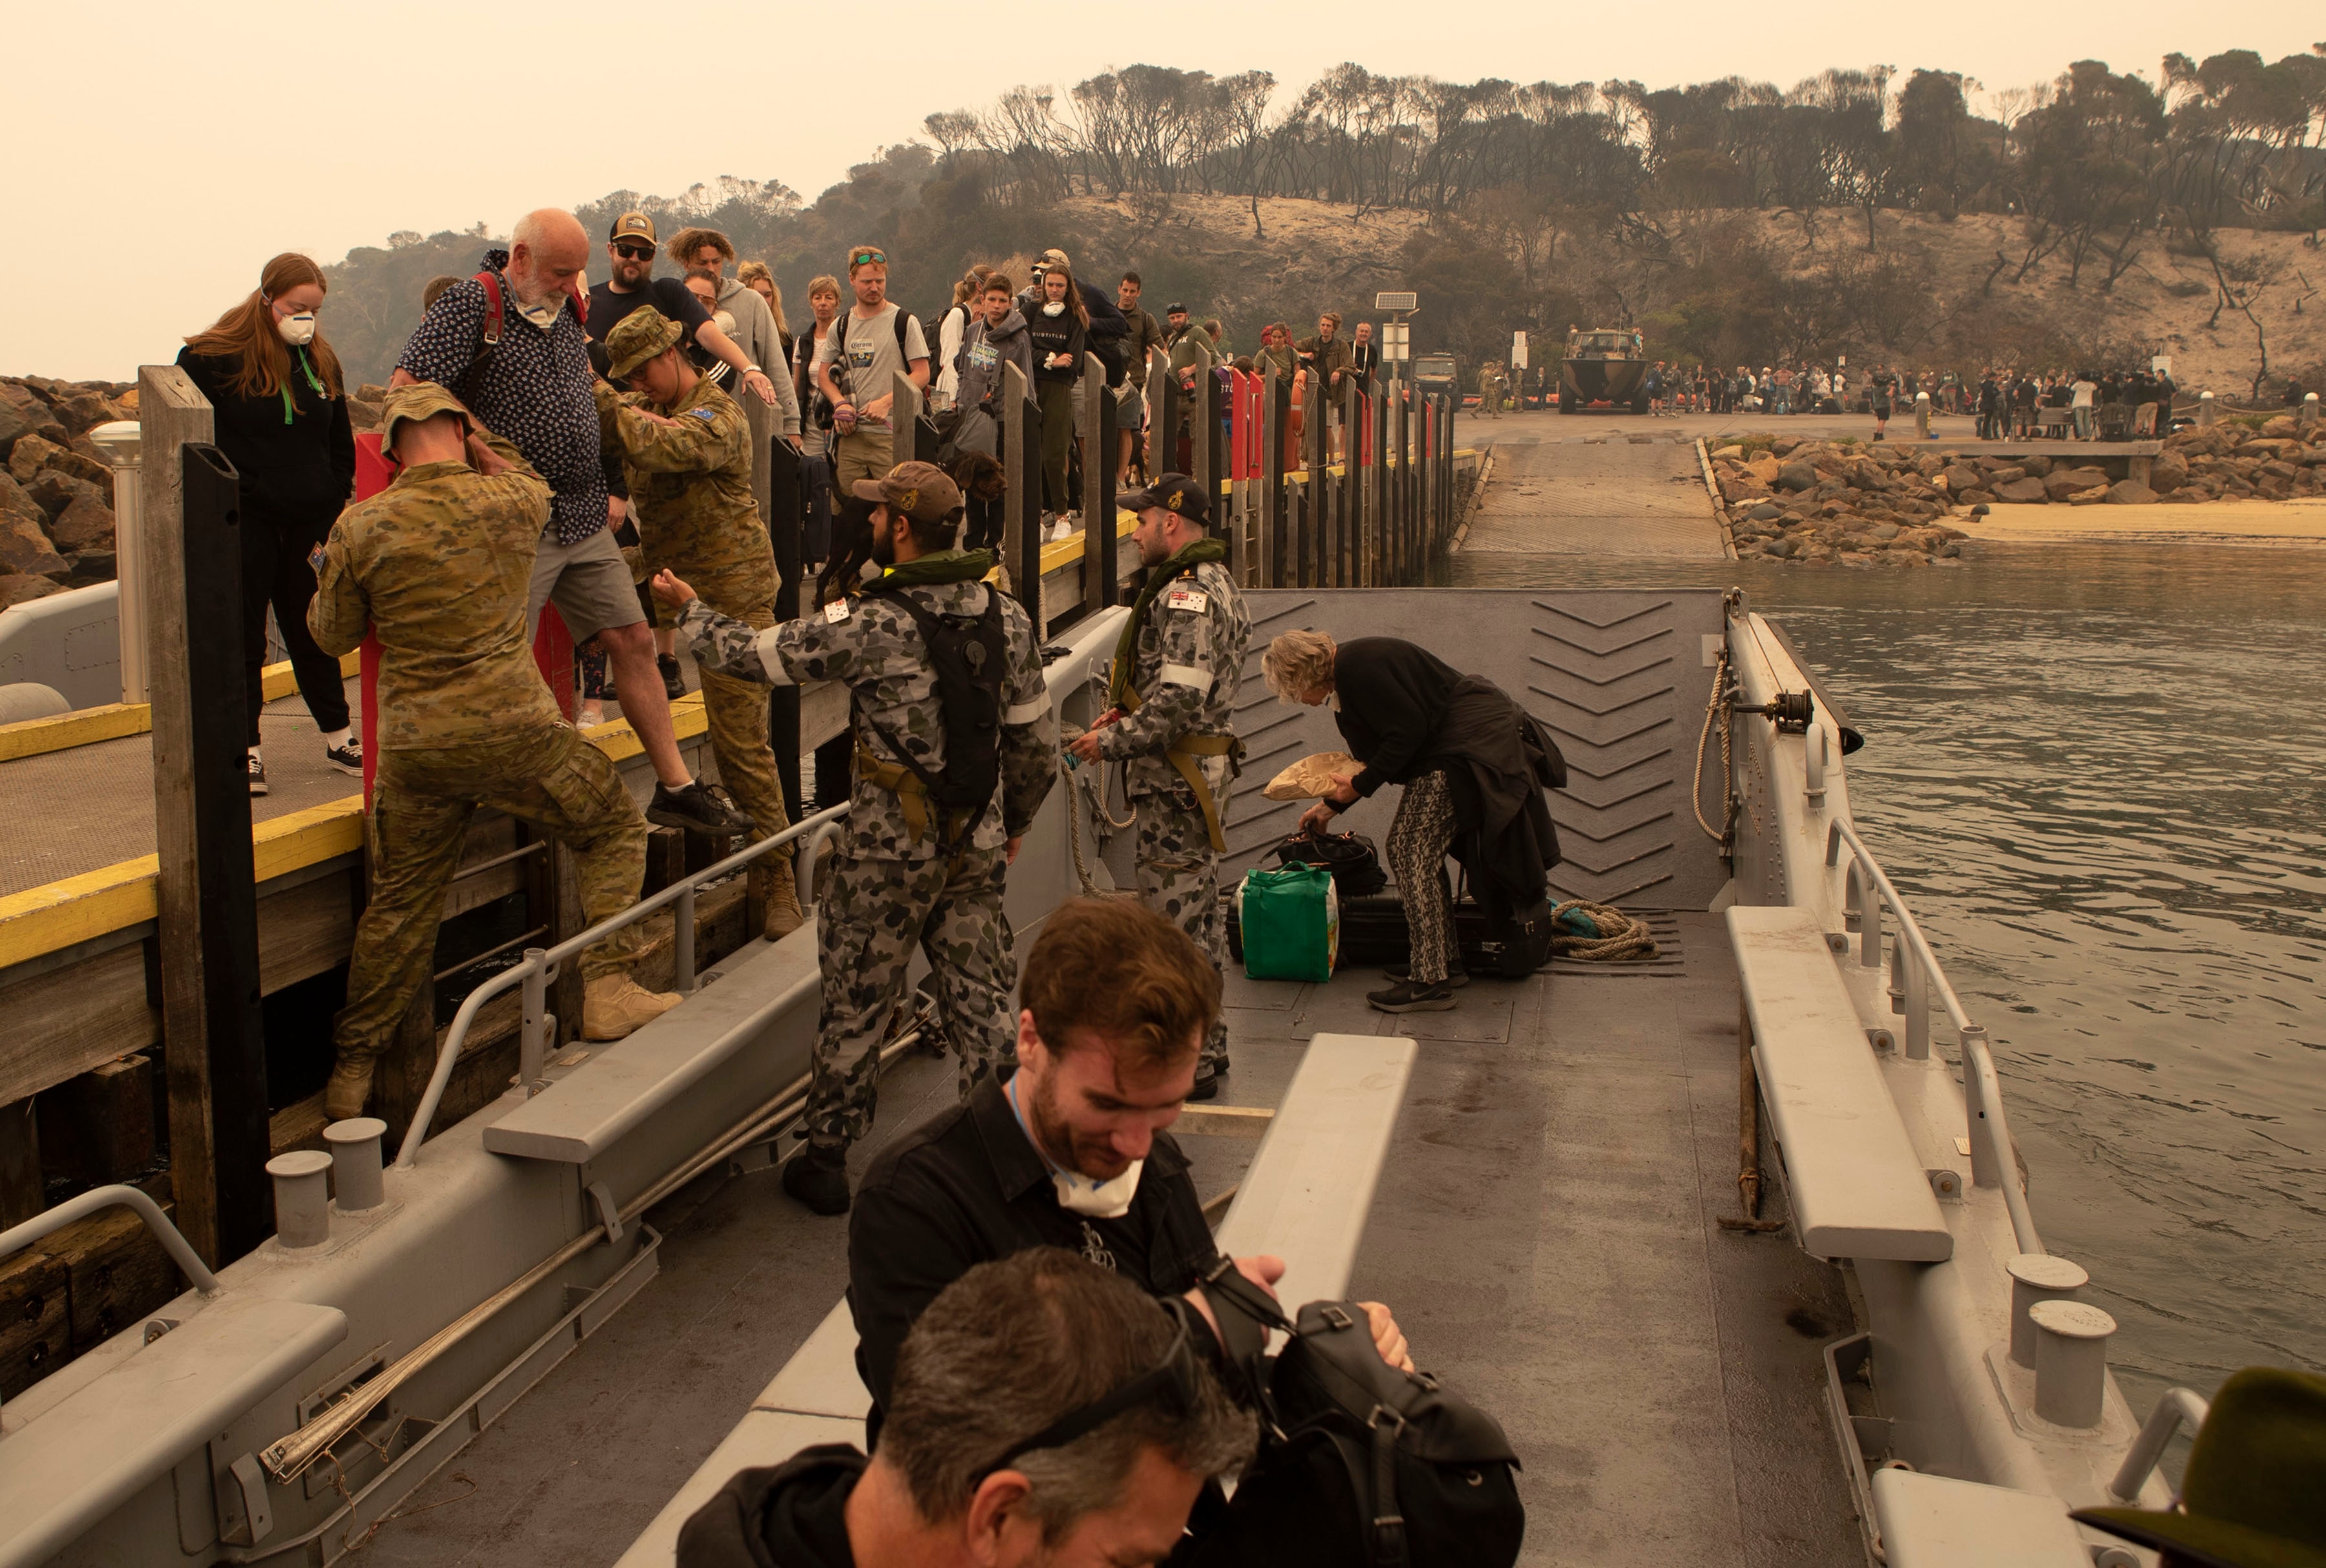 Bushfire evacuees boarding one of HMAS Choules' landing craft at Mallacoota before being ferried to the ship on January 3, 2020.